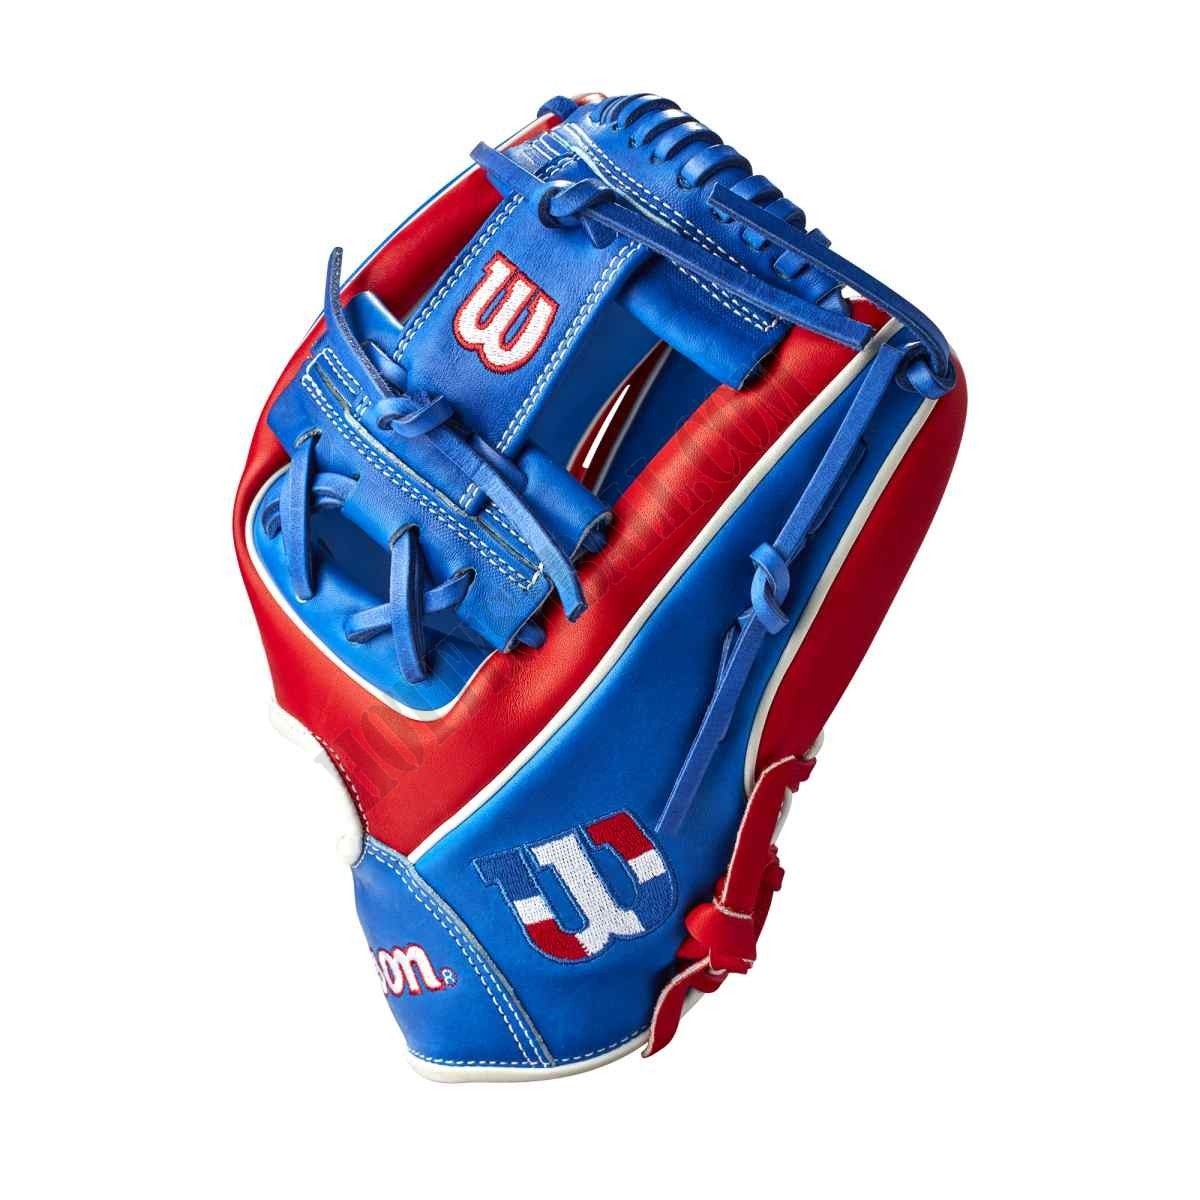 2021 A2000 1786 Dominican Republic 11.5" Infield Baseball Glove - Limited Edition ● Wilson Promotions - -3